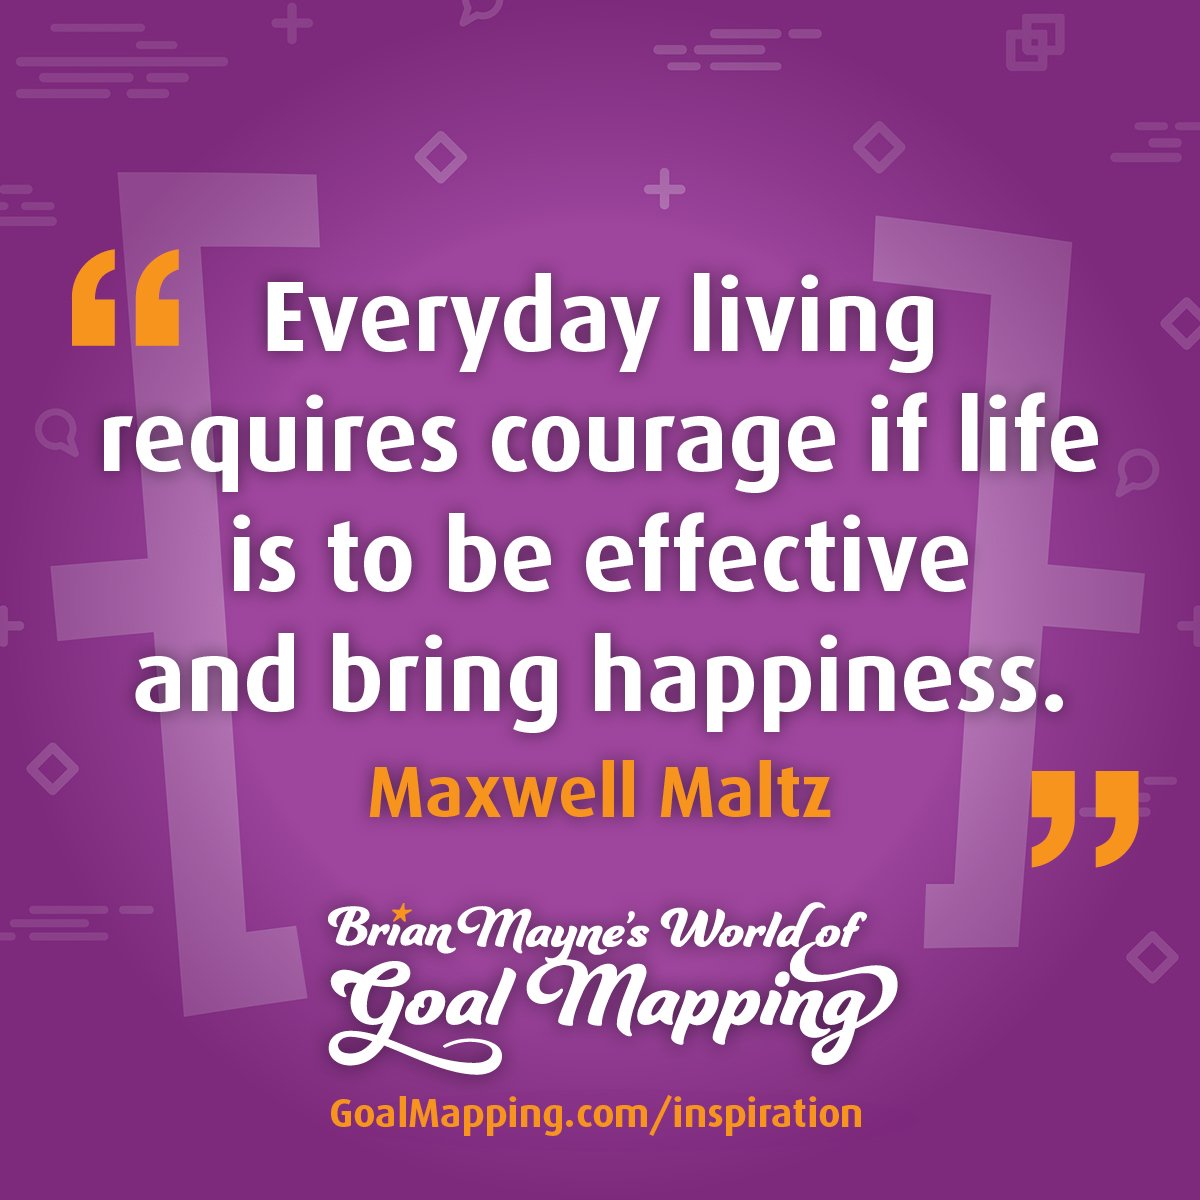 "Everyday living requires courage if life is to be effective and bring happiness." Maxwell Maltz